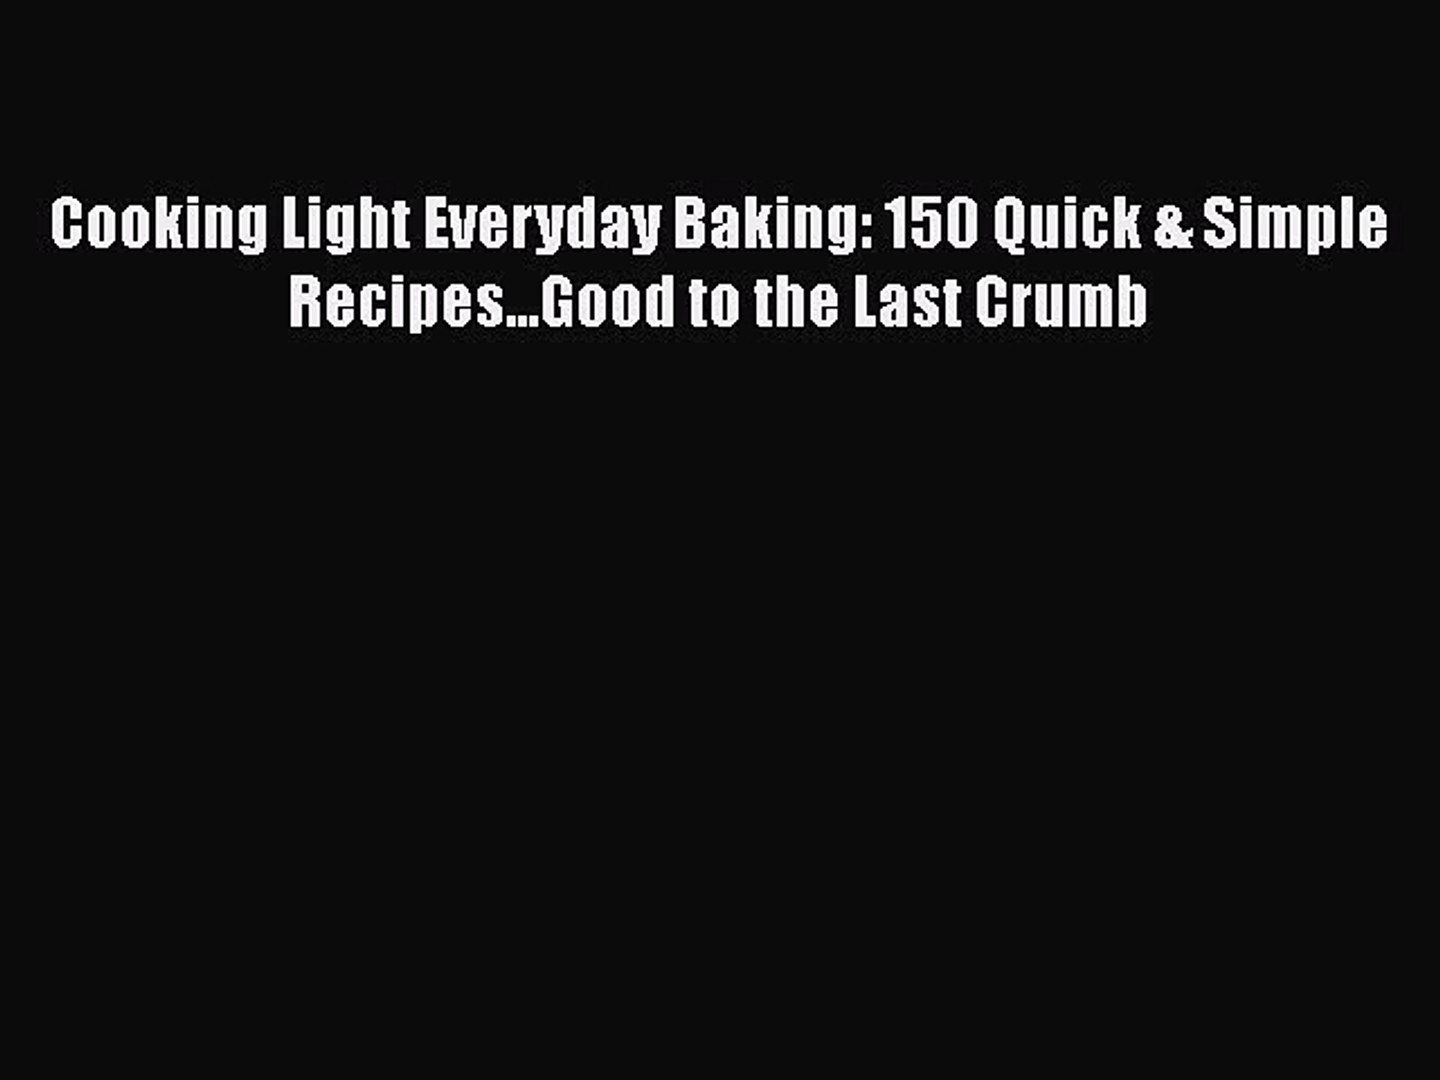 Download Cooking Light Everyday Baking: 150 Quick & Simple Recipes...Good to the Last Crumb